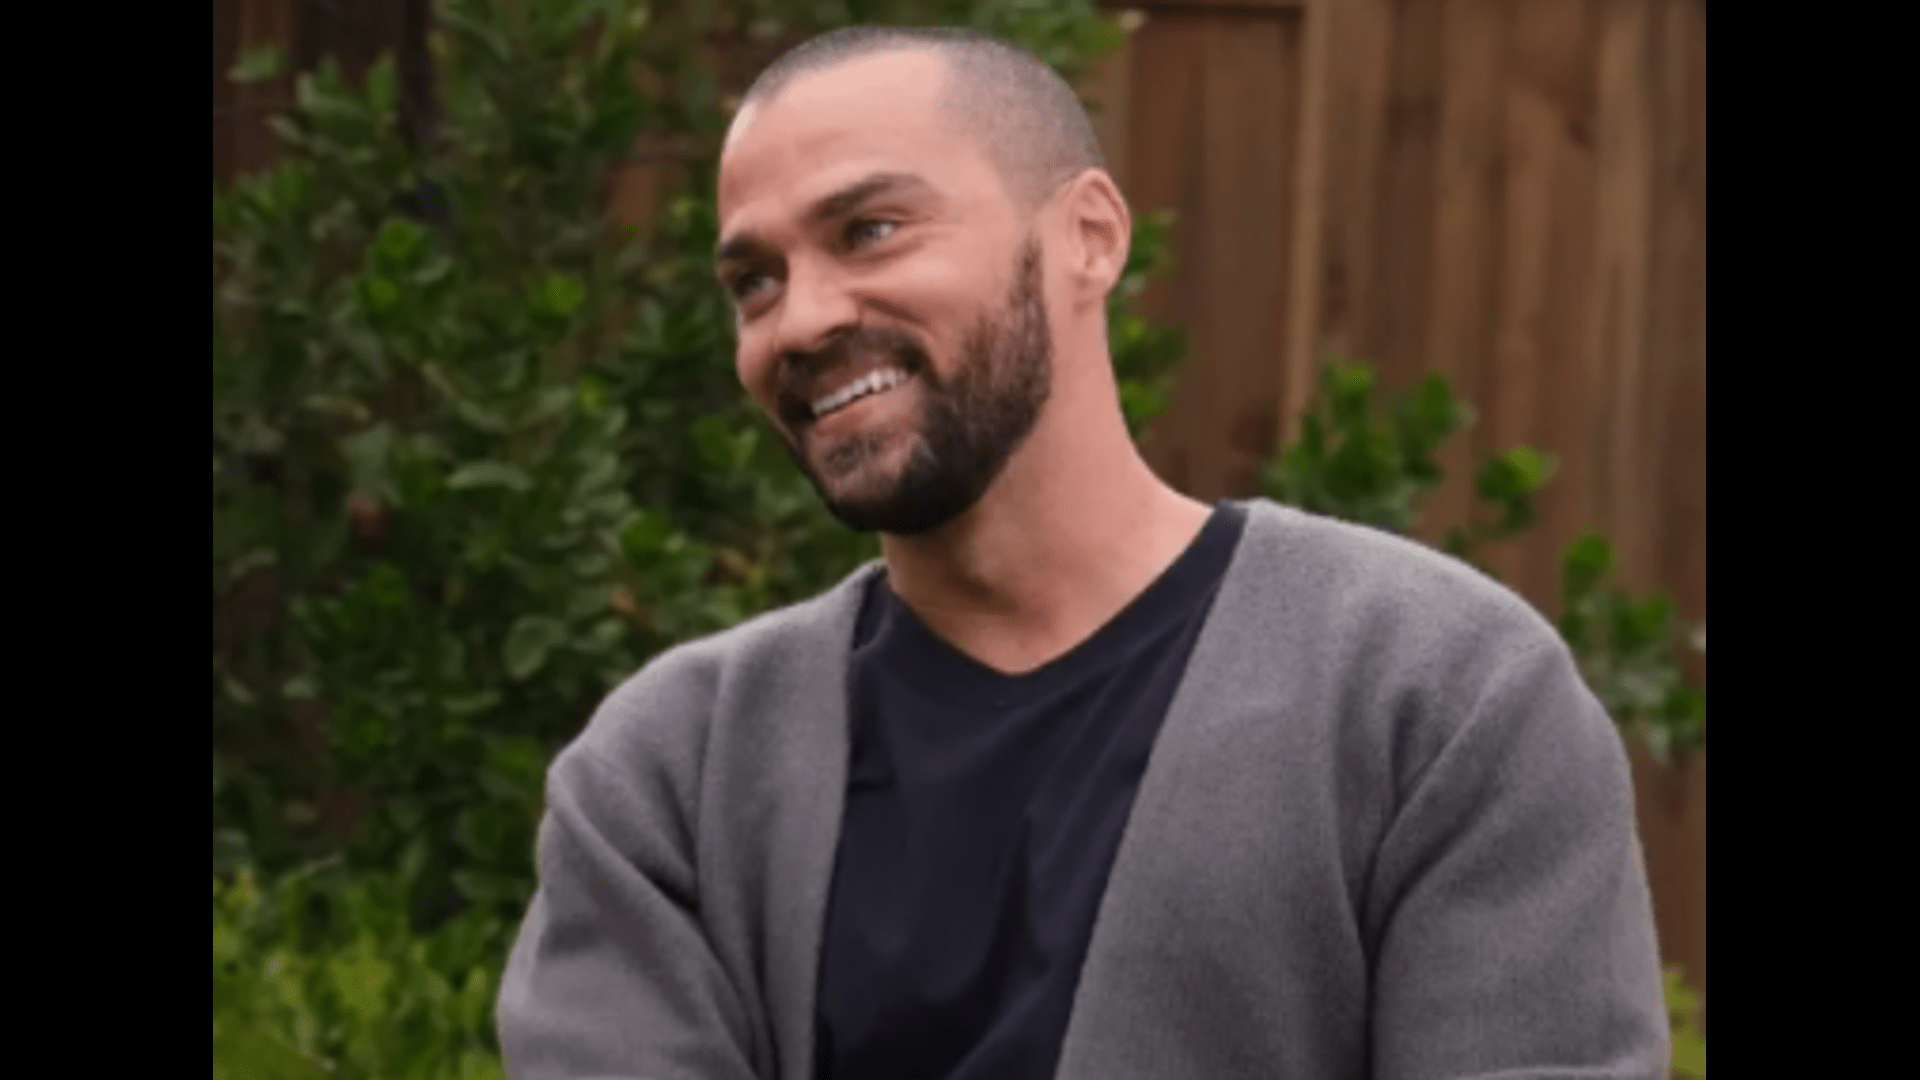 in-the-new-broadway-show-greys-anatomy-star-jesse-williams-is-scared-of-being-naked